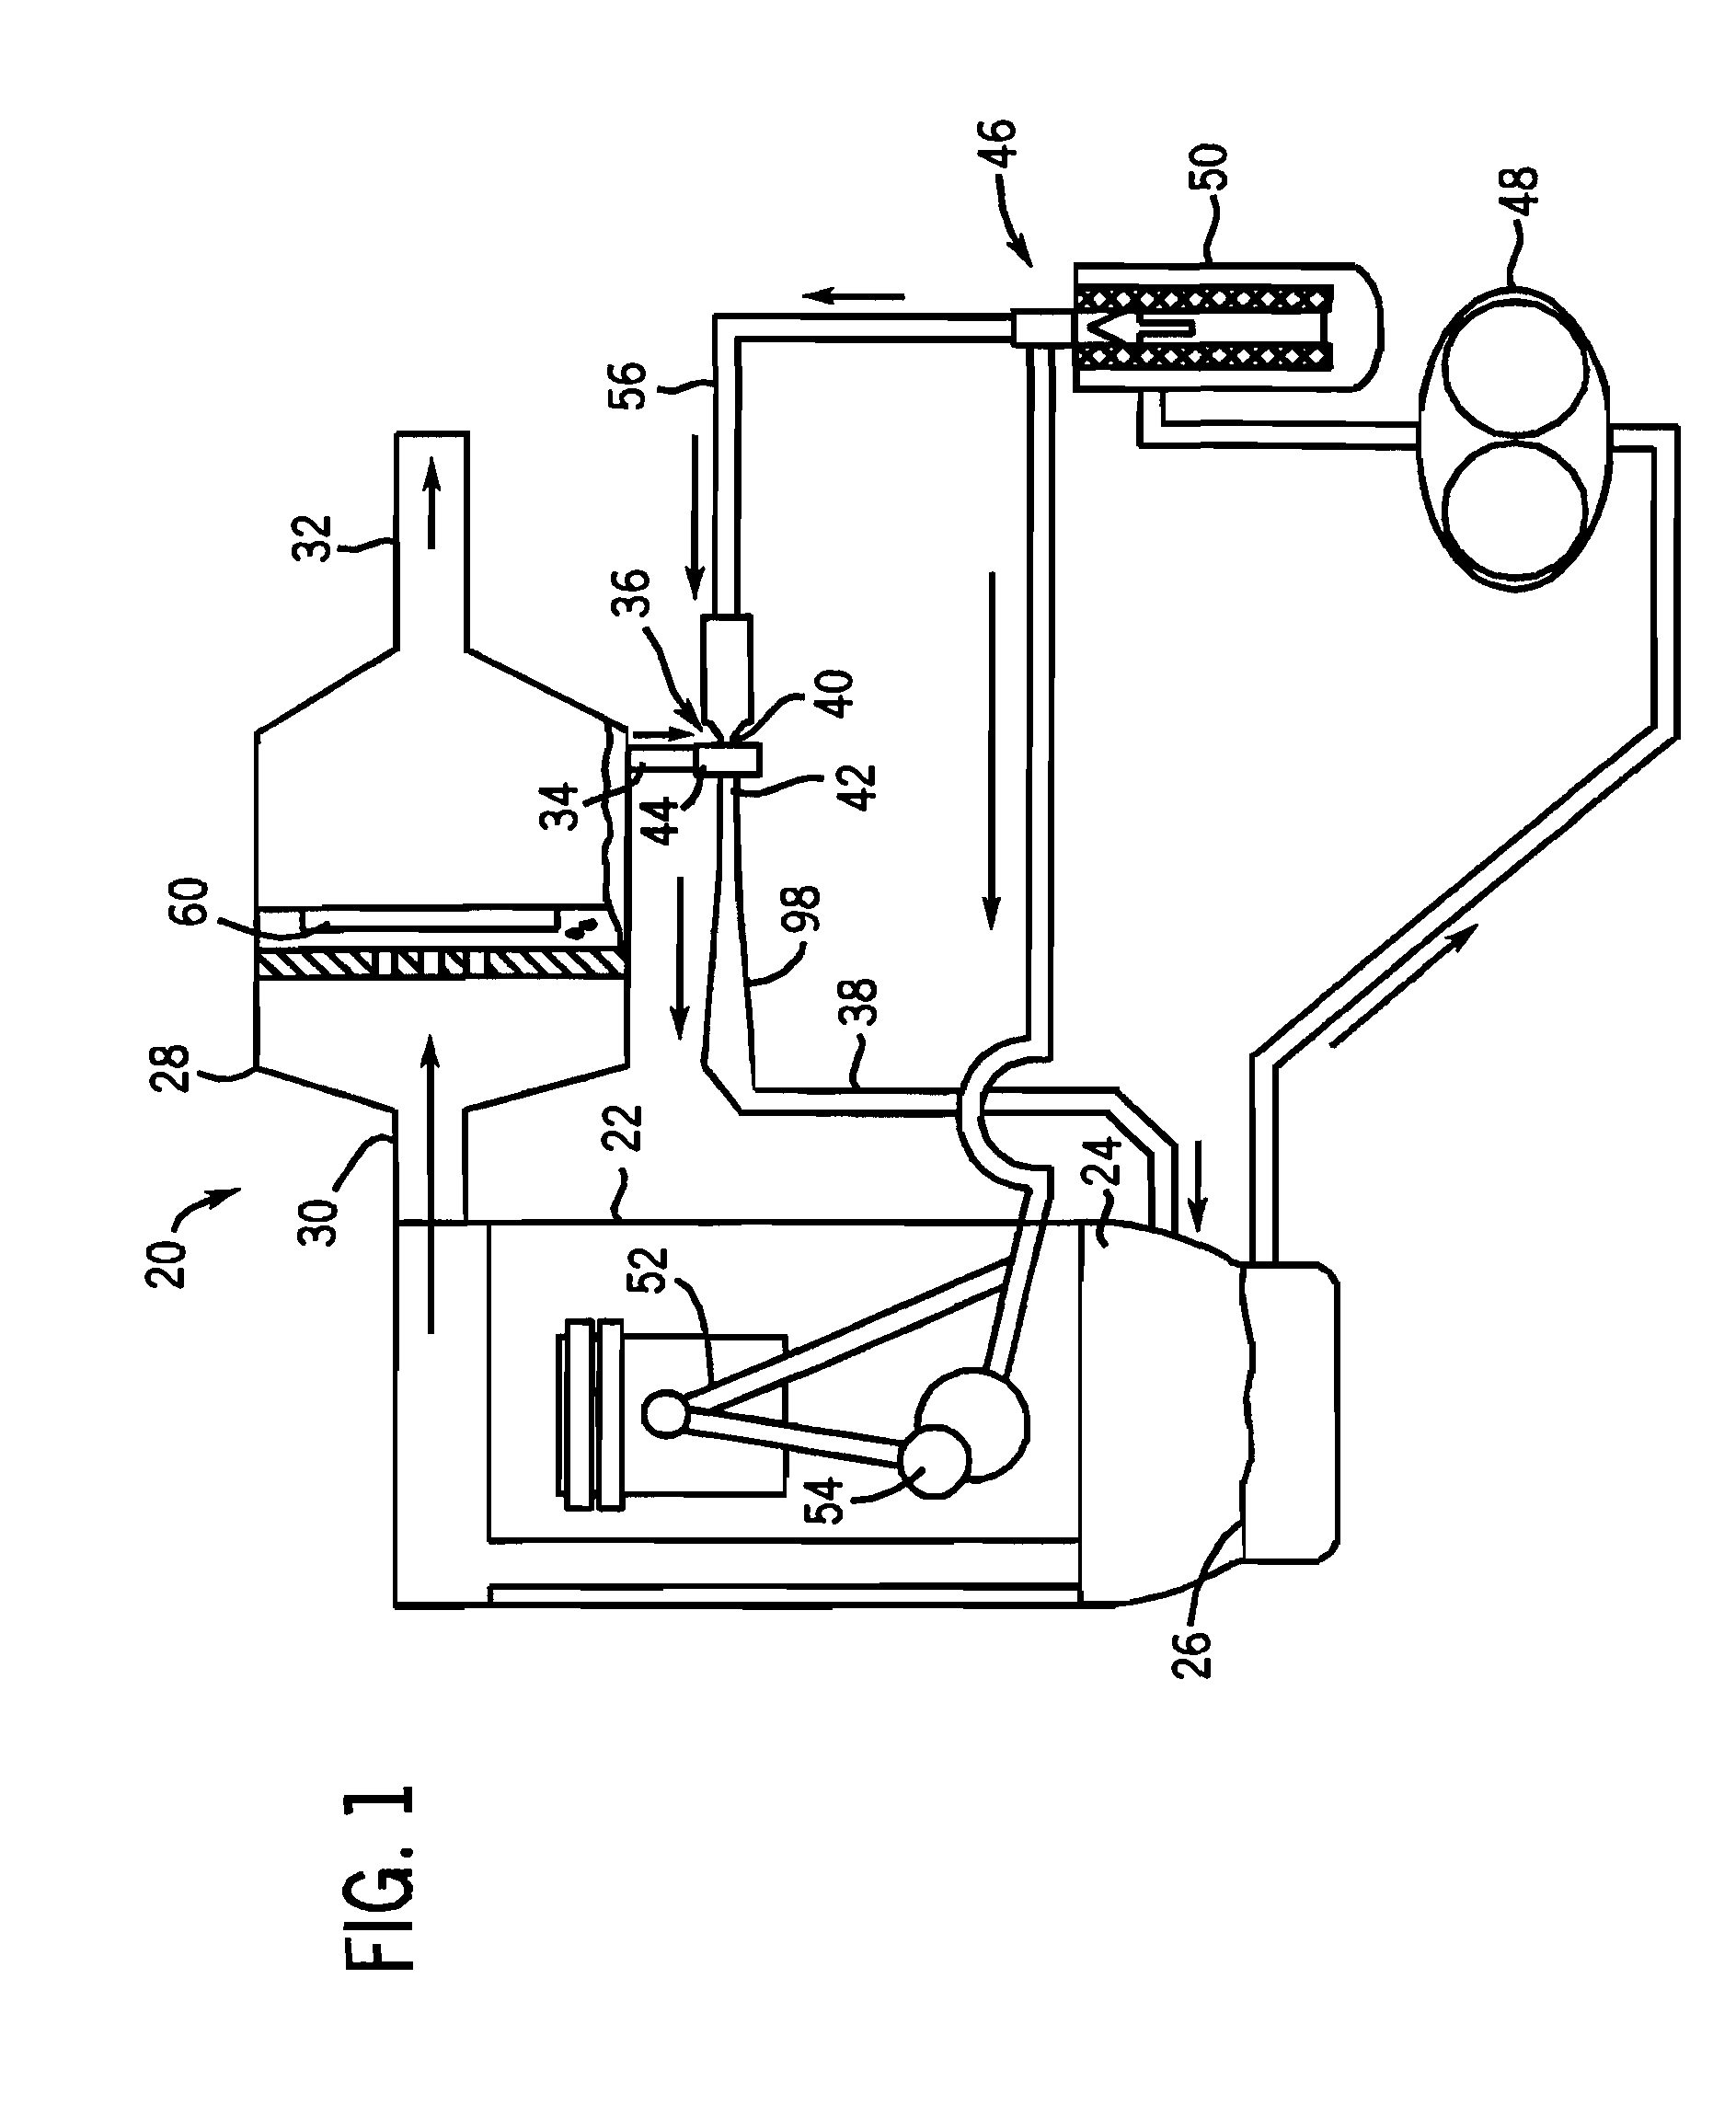 Crankcase Ventilation System with Engine Driven Pumped Scavenged Oil